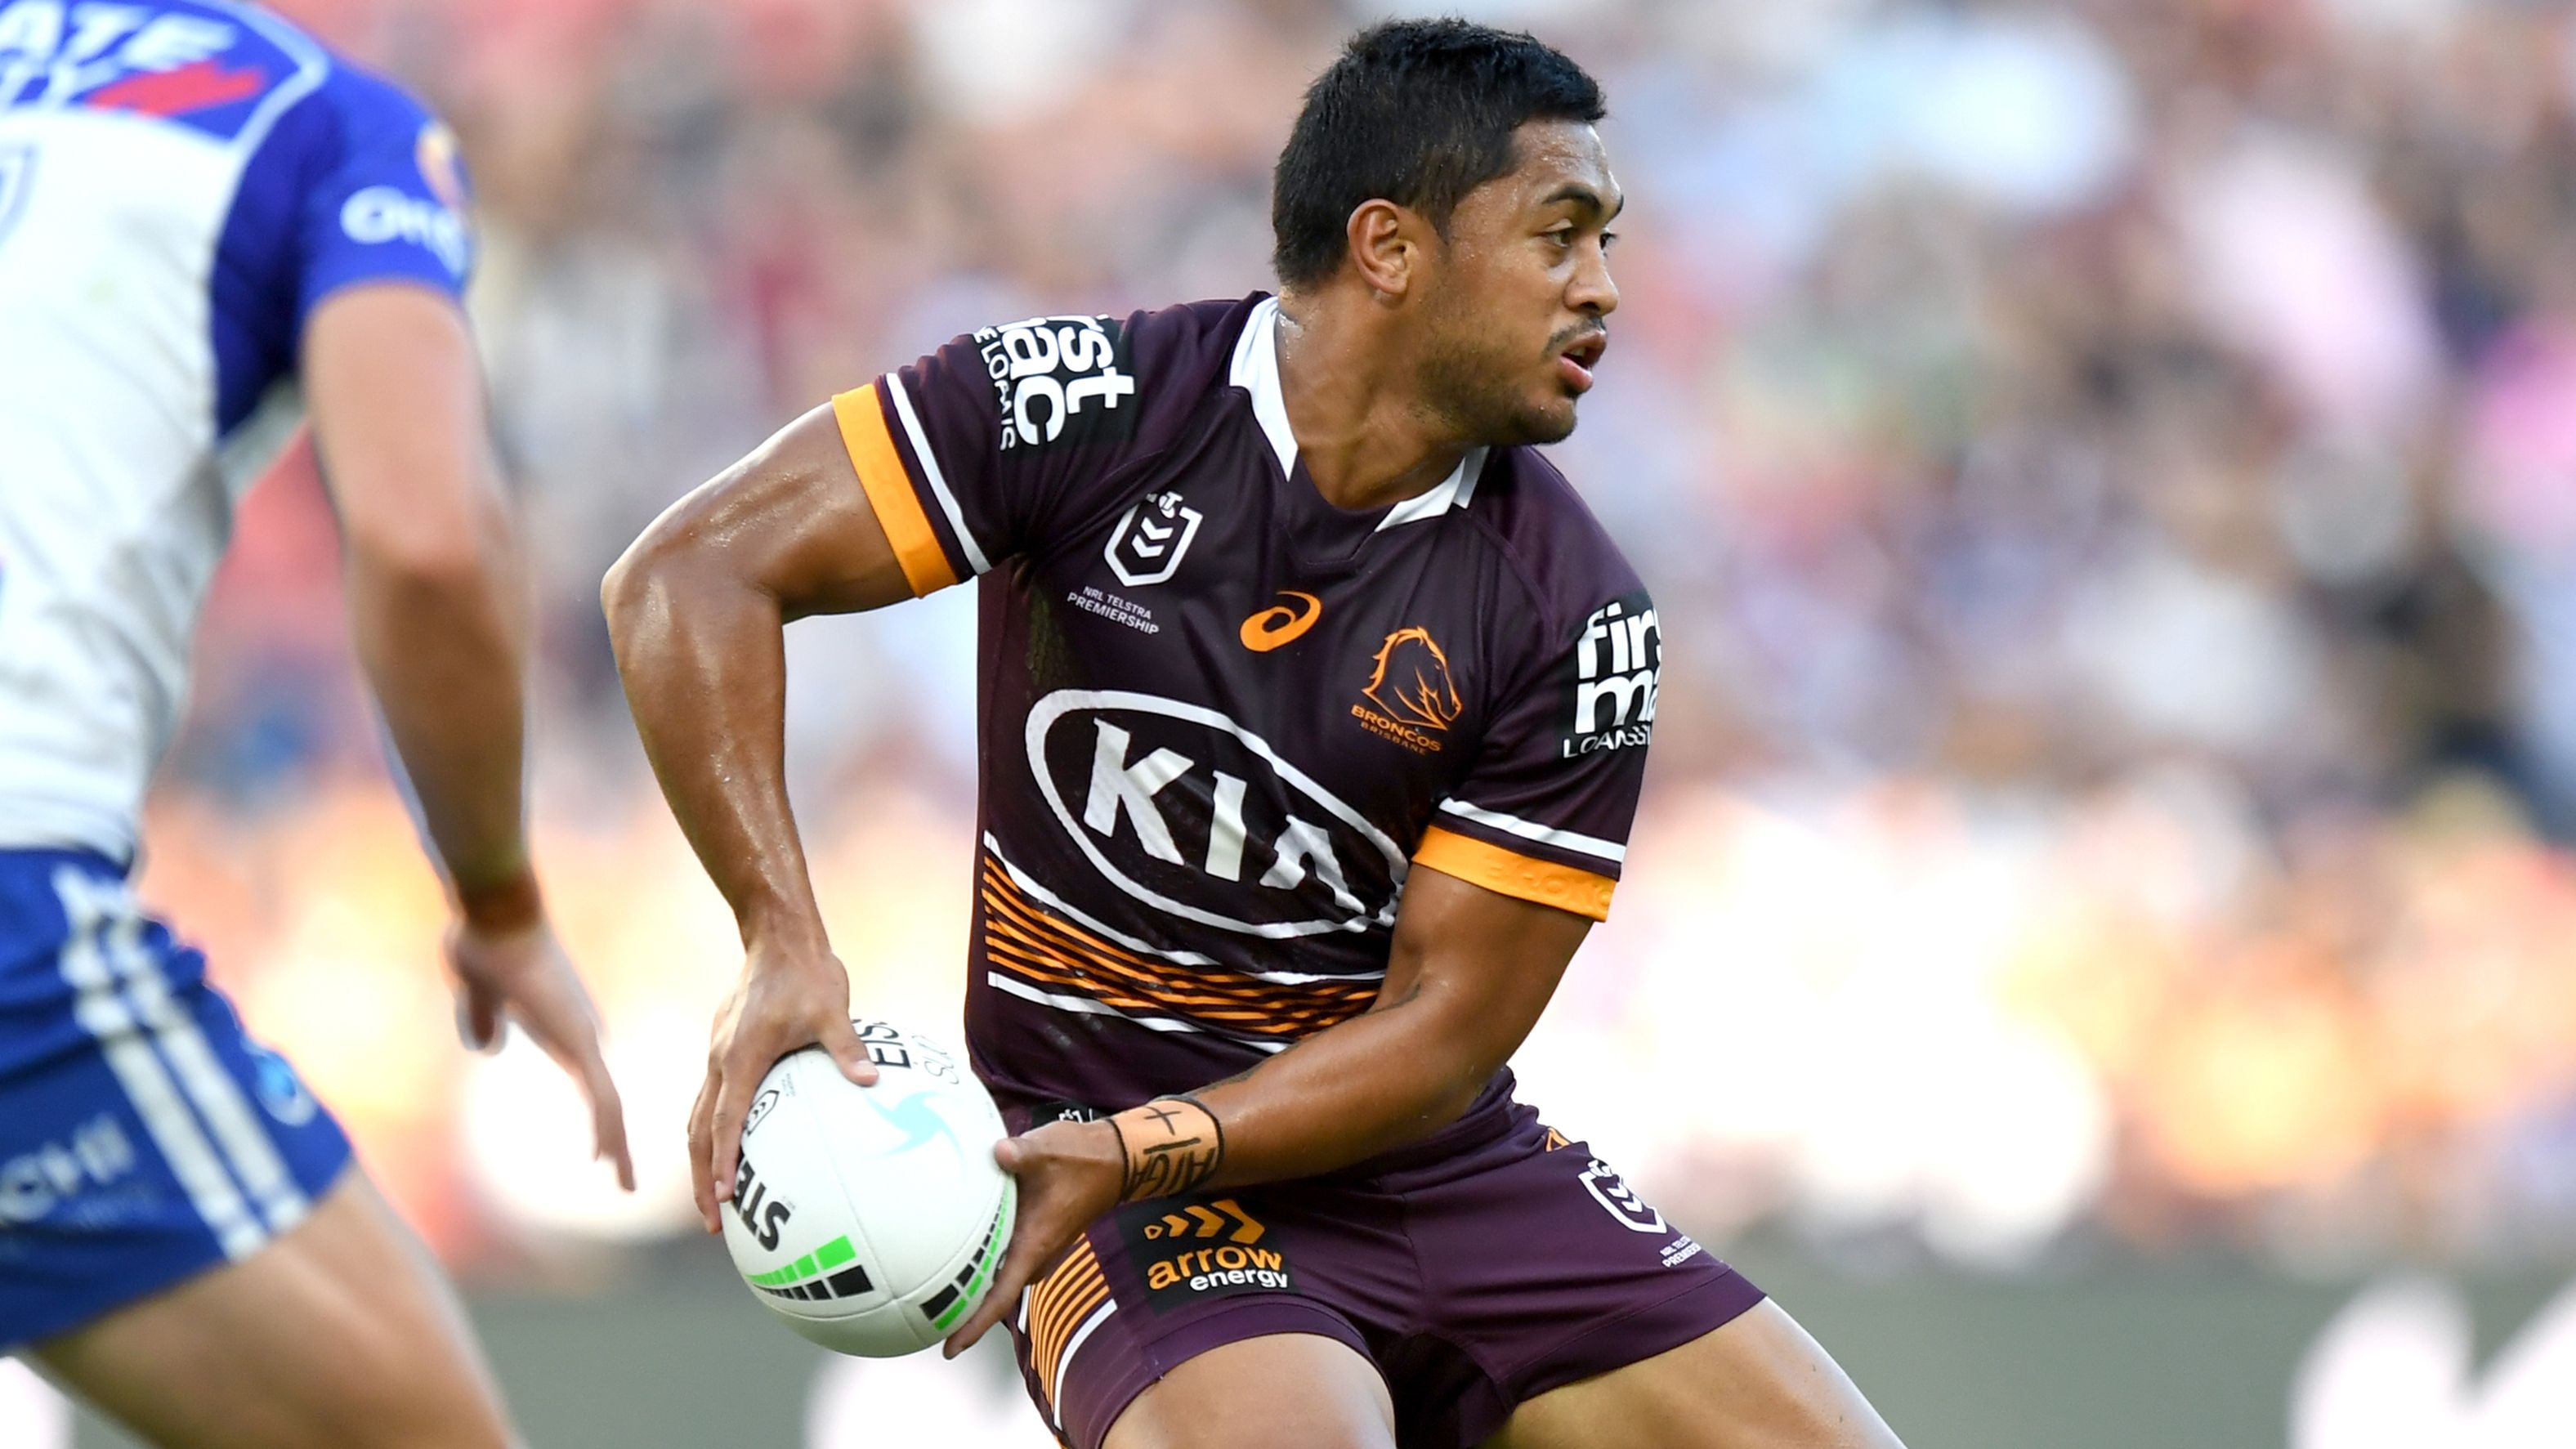 EXCLUSIVE: Andrew Johns and Brad Fittler on how Anthony Milford can reboot career